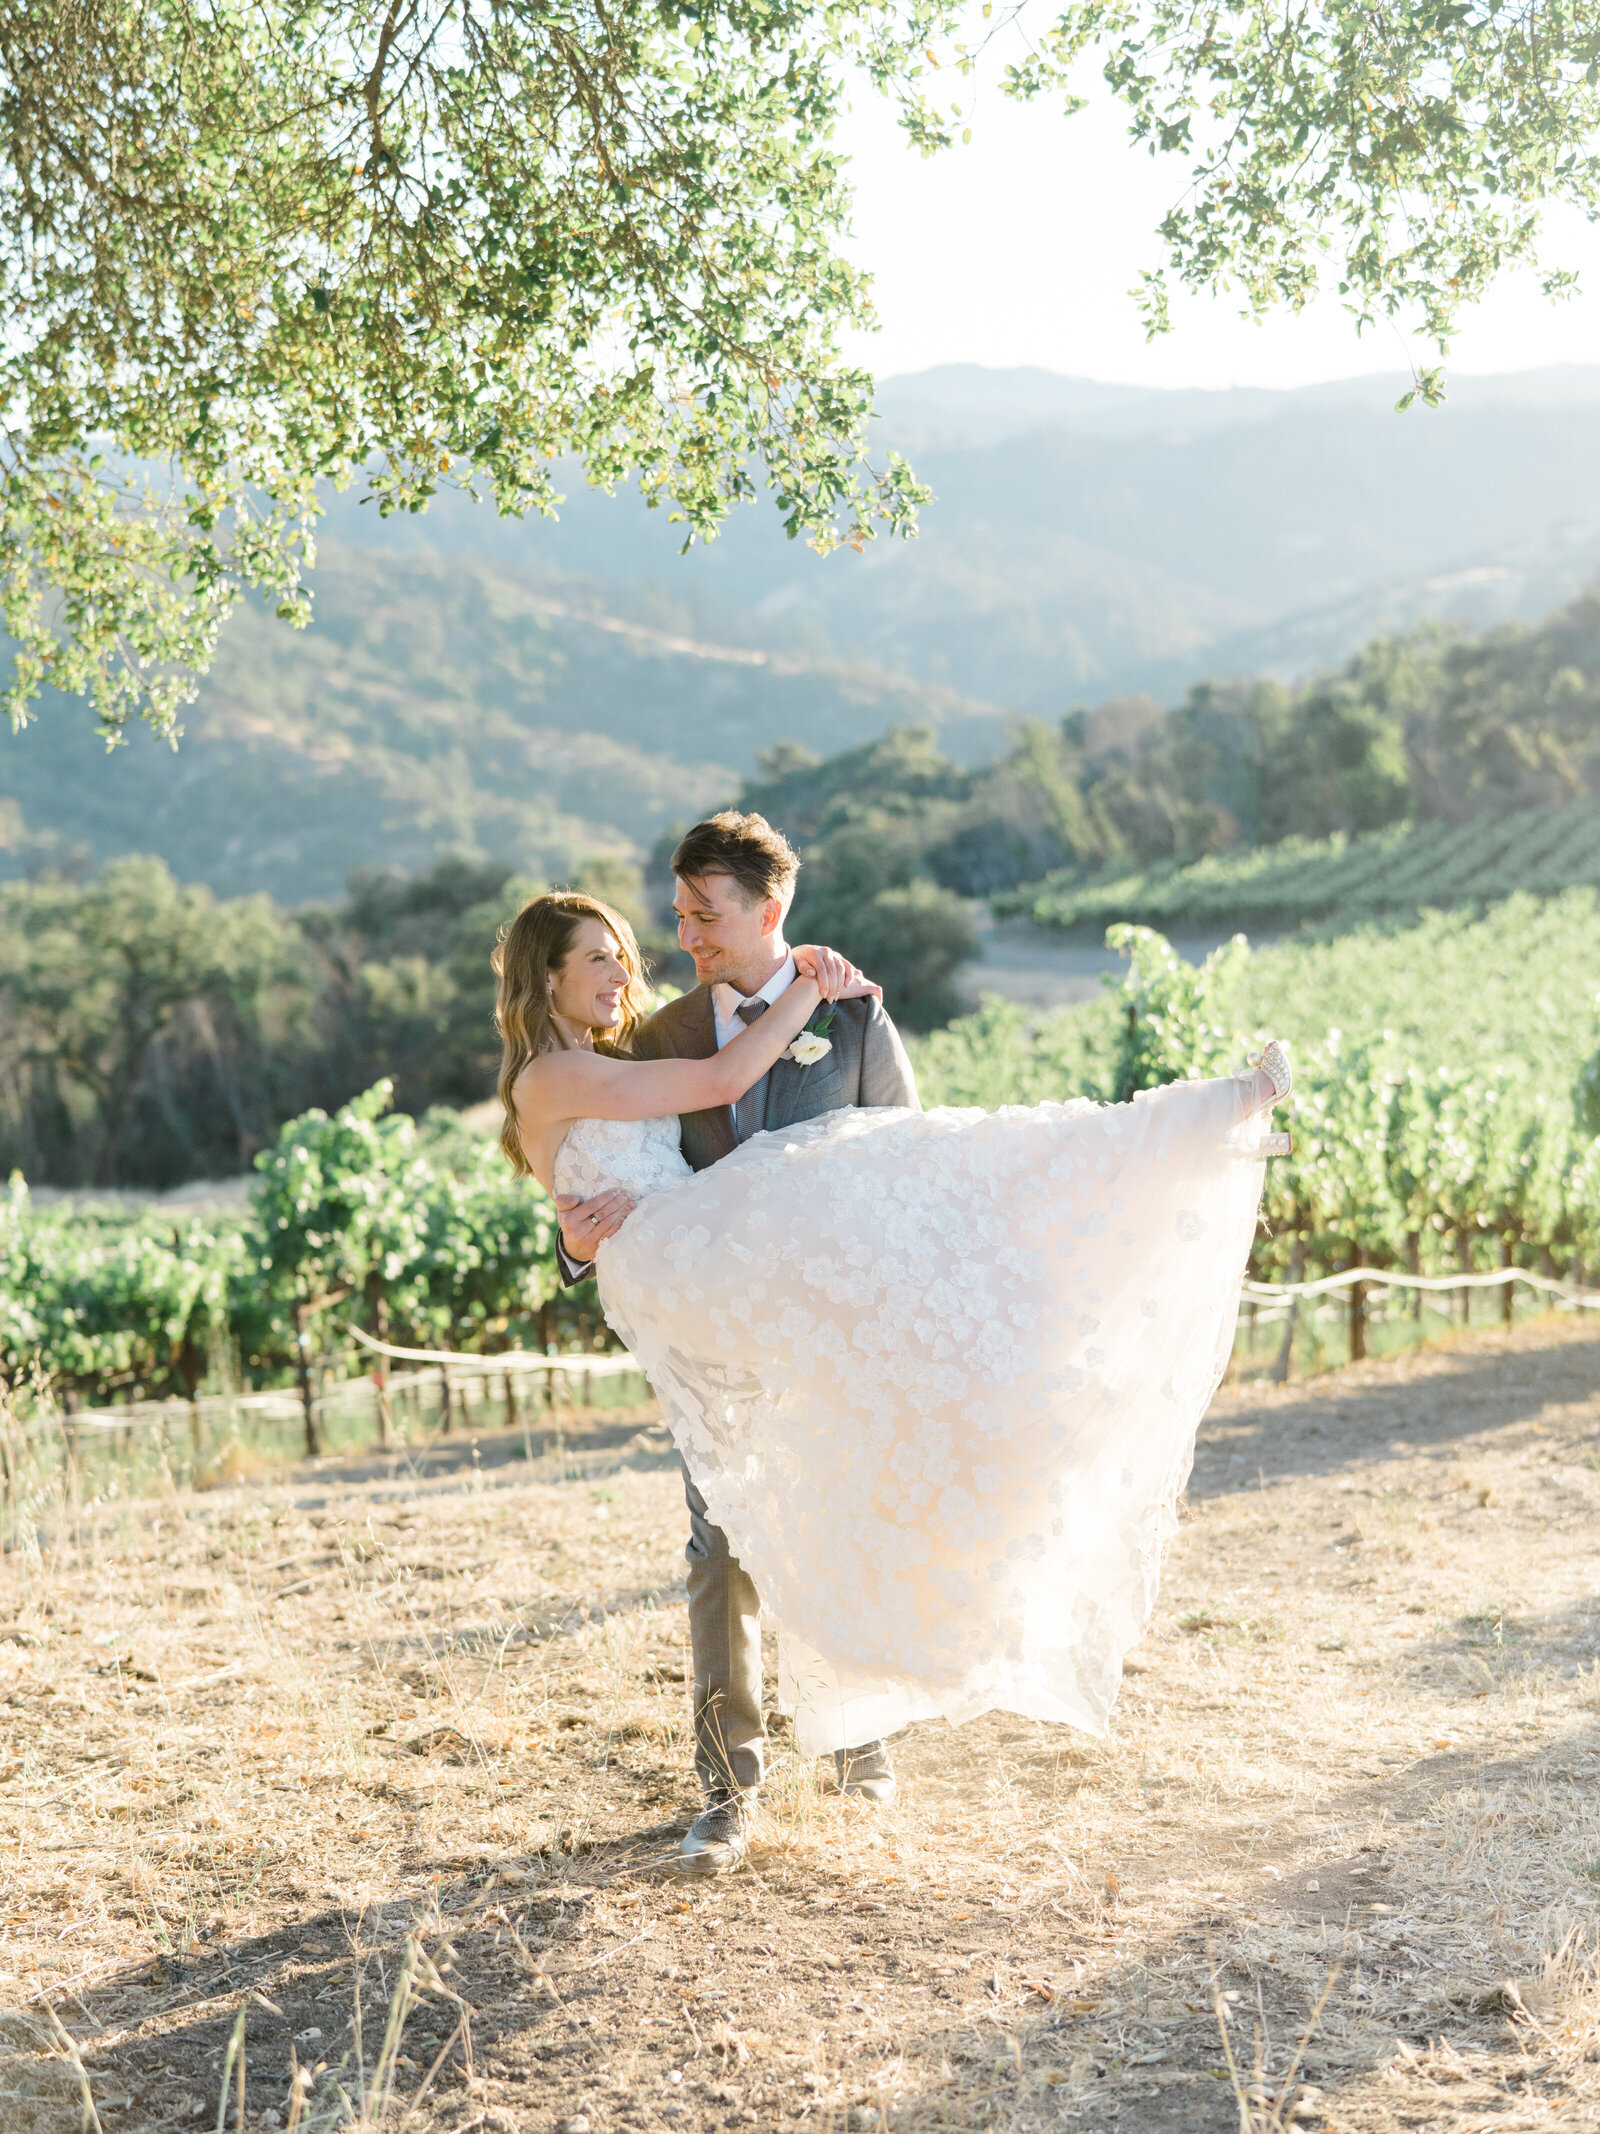 groom picking up the bride and walking with her in his arms through a vineyard